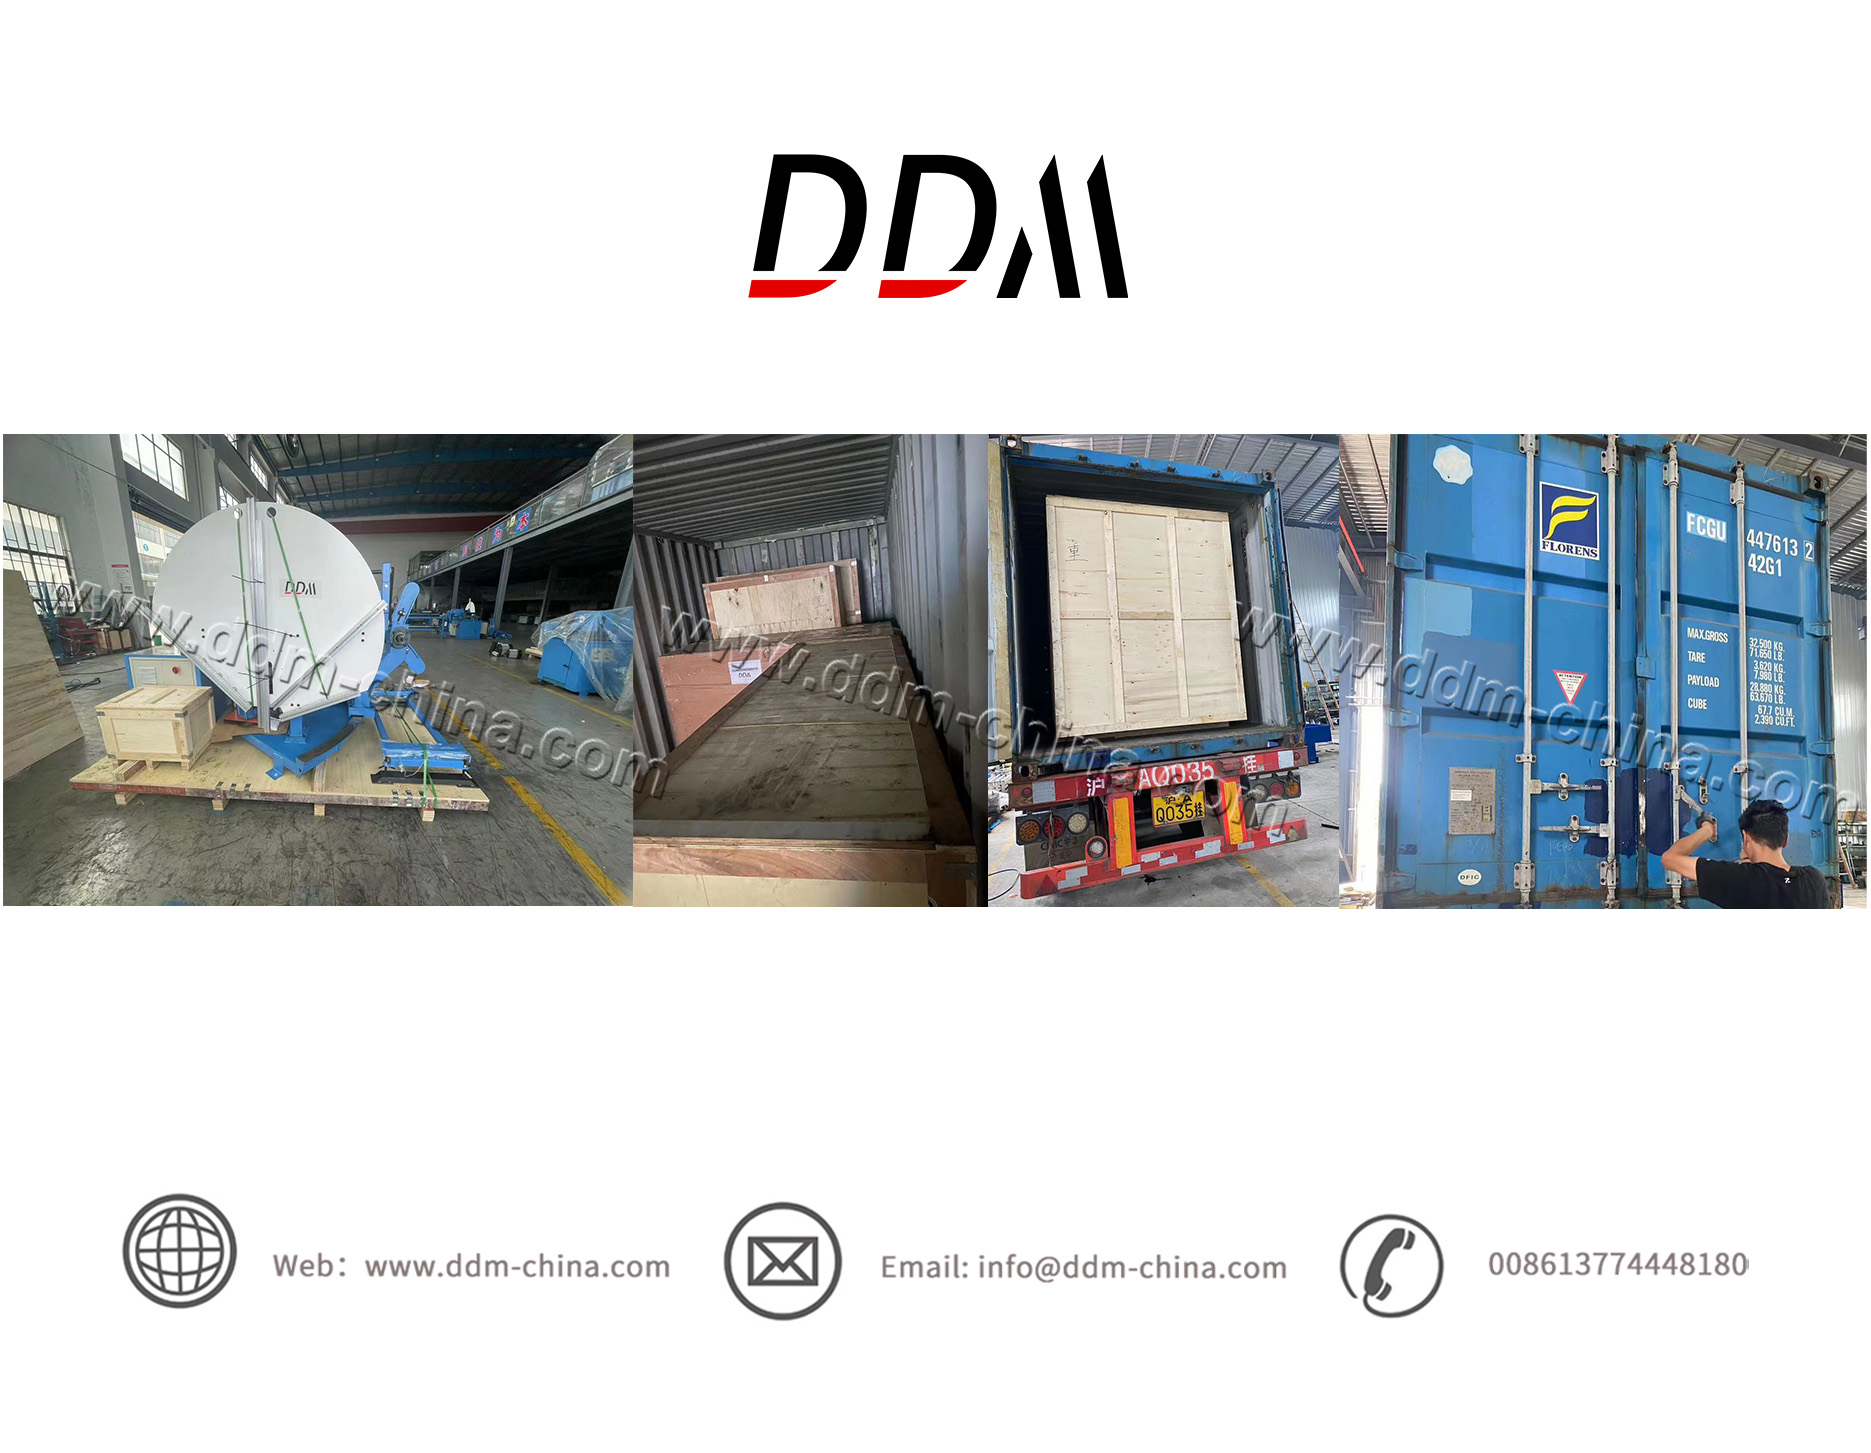 DDM HVAC duct forming machine to Sourth Africa 